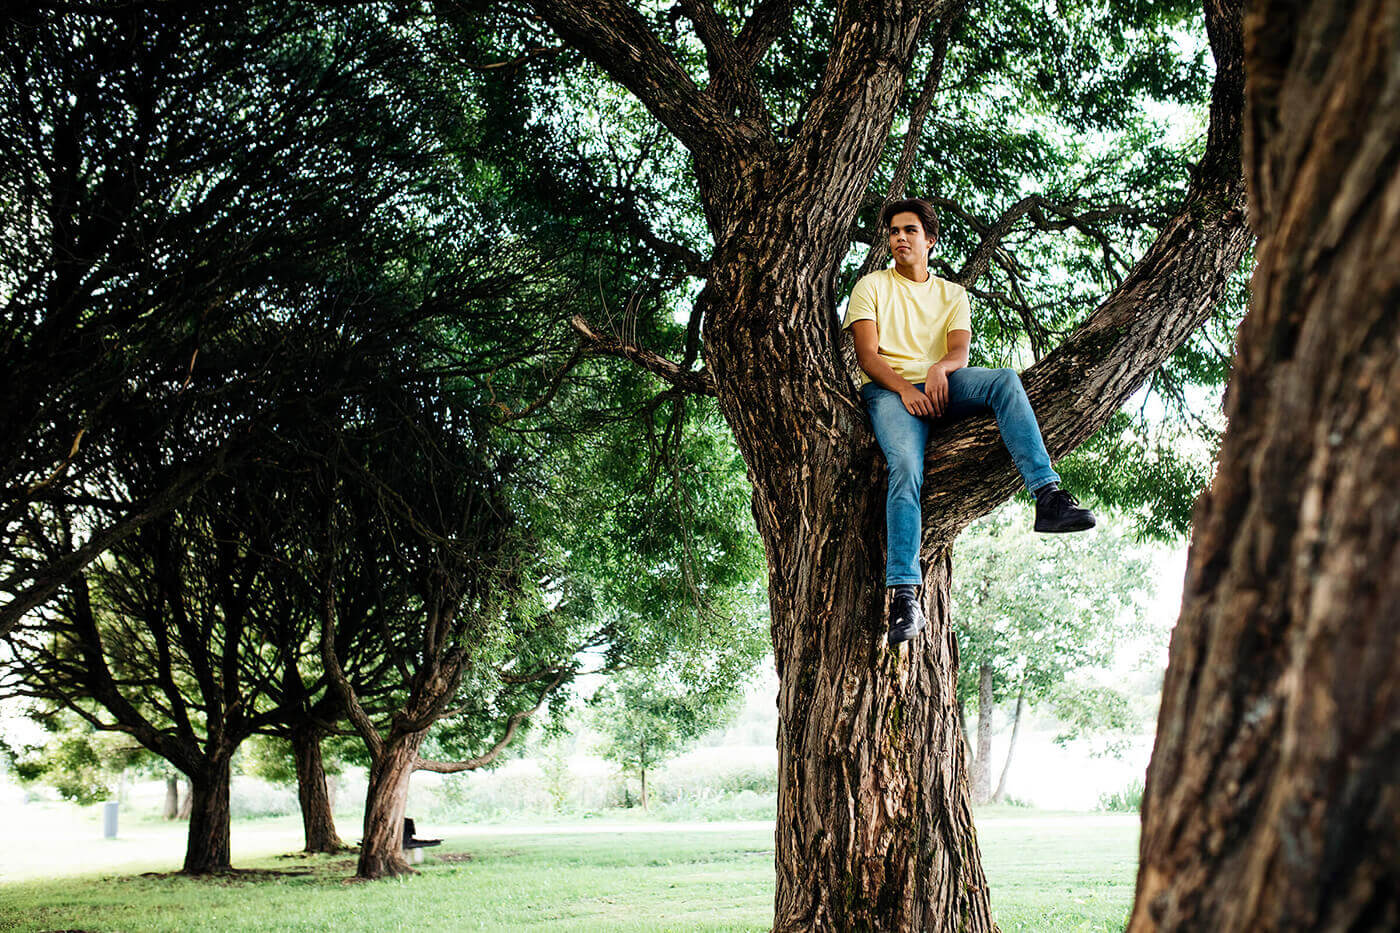 A young boy sitting on a tree in a park